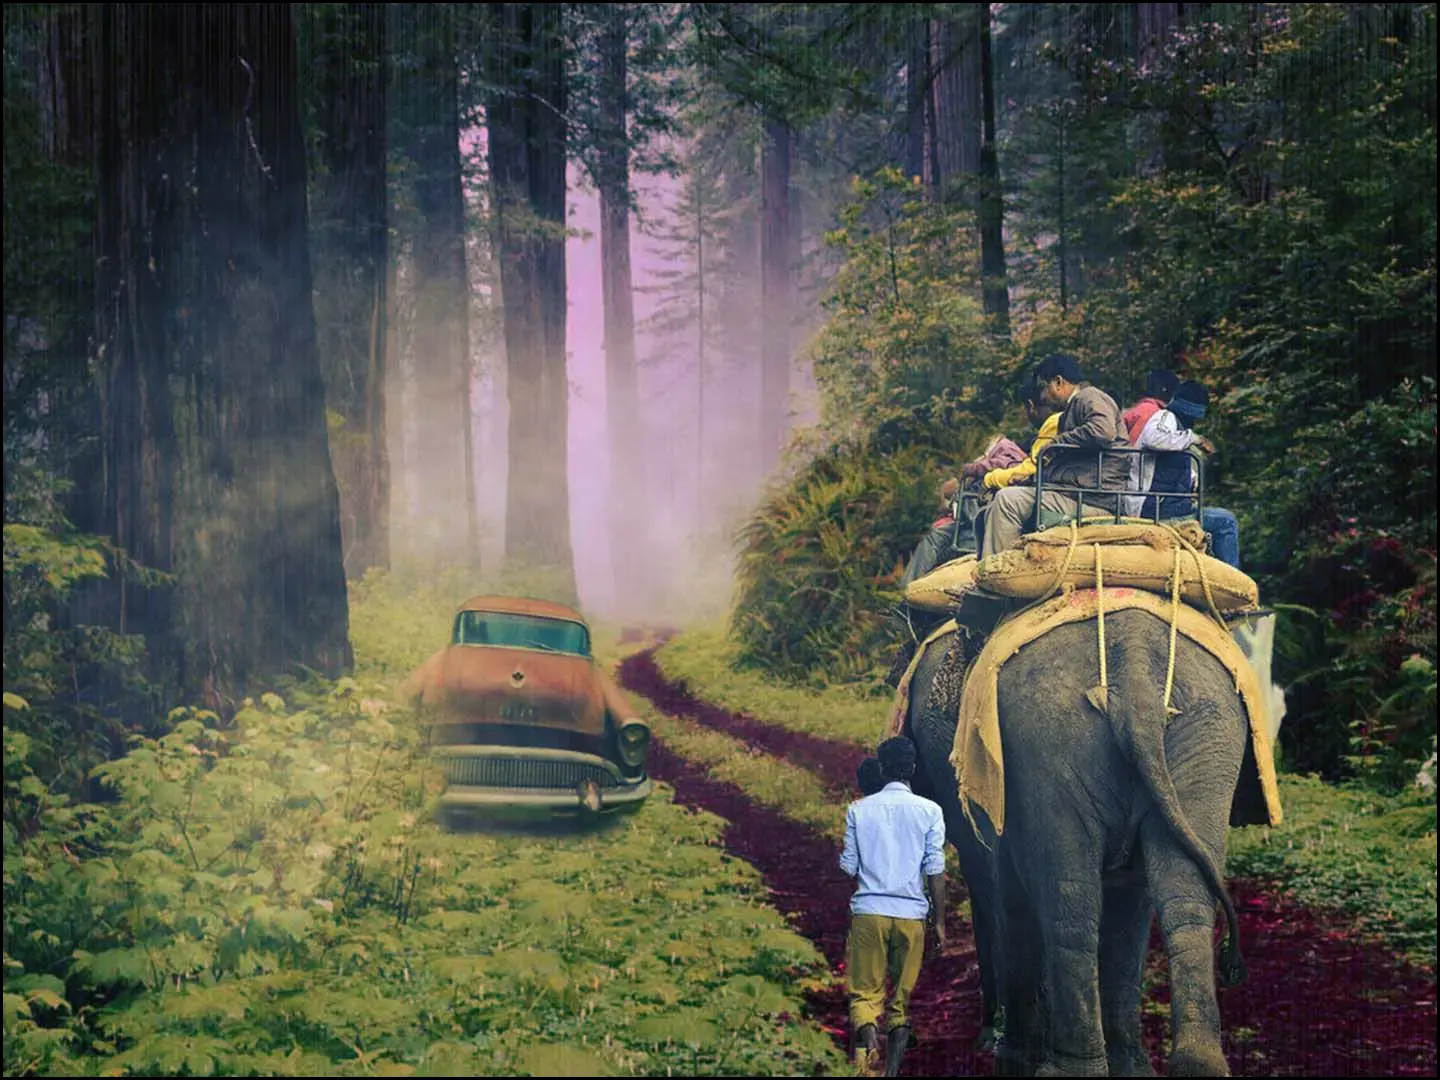 Kamal Webb image design displaying use of the rule of thirds showing people on an elephant with a person walking.